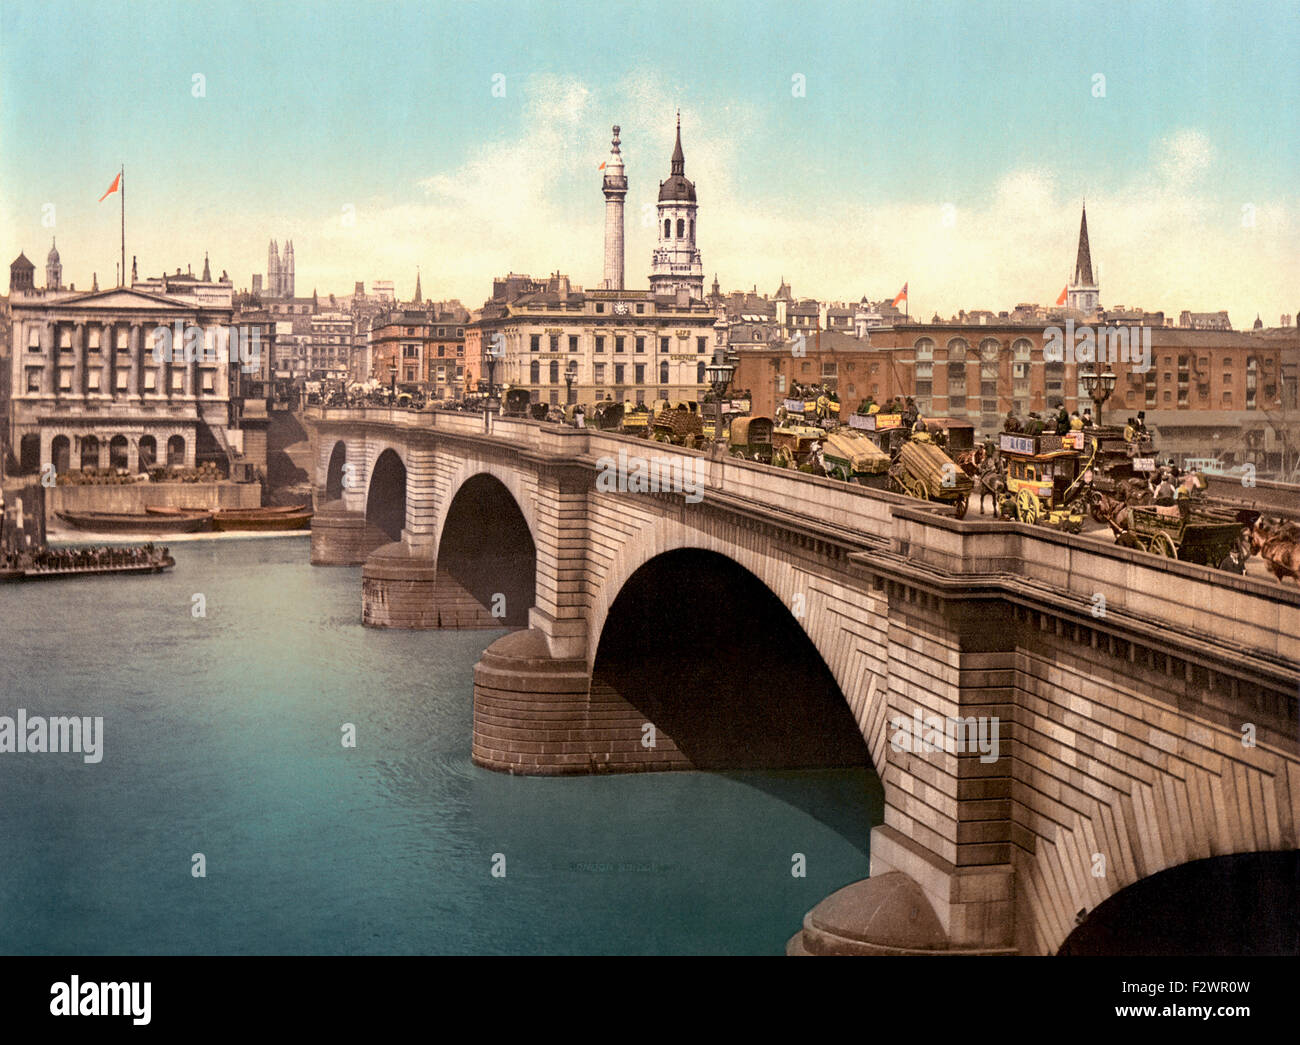 London, England.  London Bridge spanning the River Thames.  This late 19th century photograph shows the Victorian stone arch version of the bridge which existed from 1832 until 1968. Stock Photo